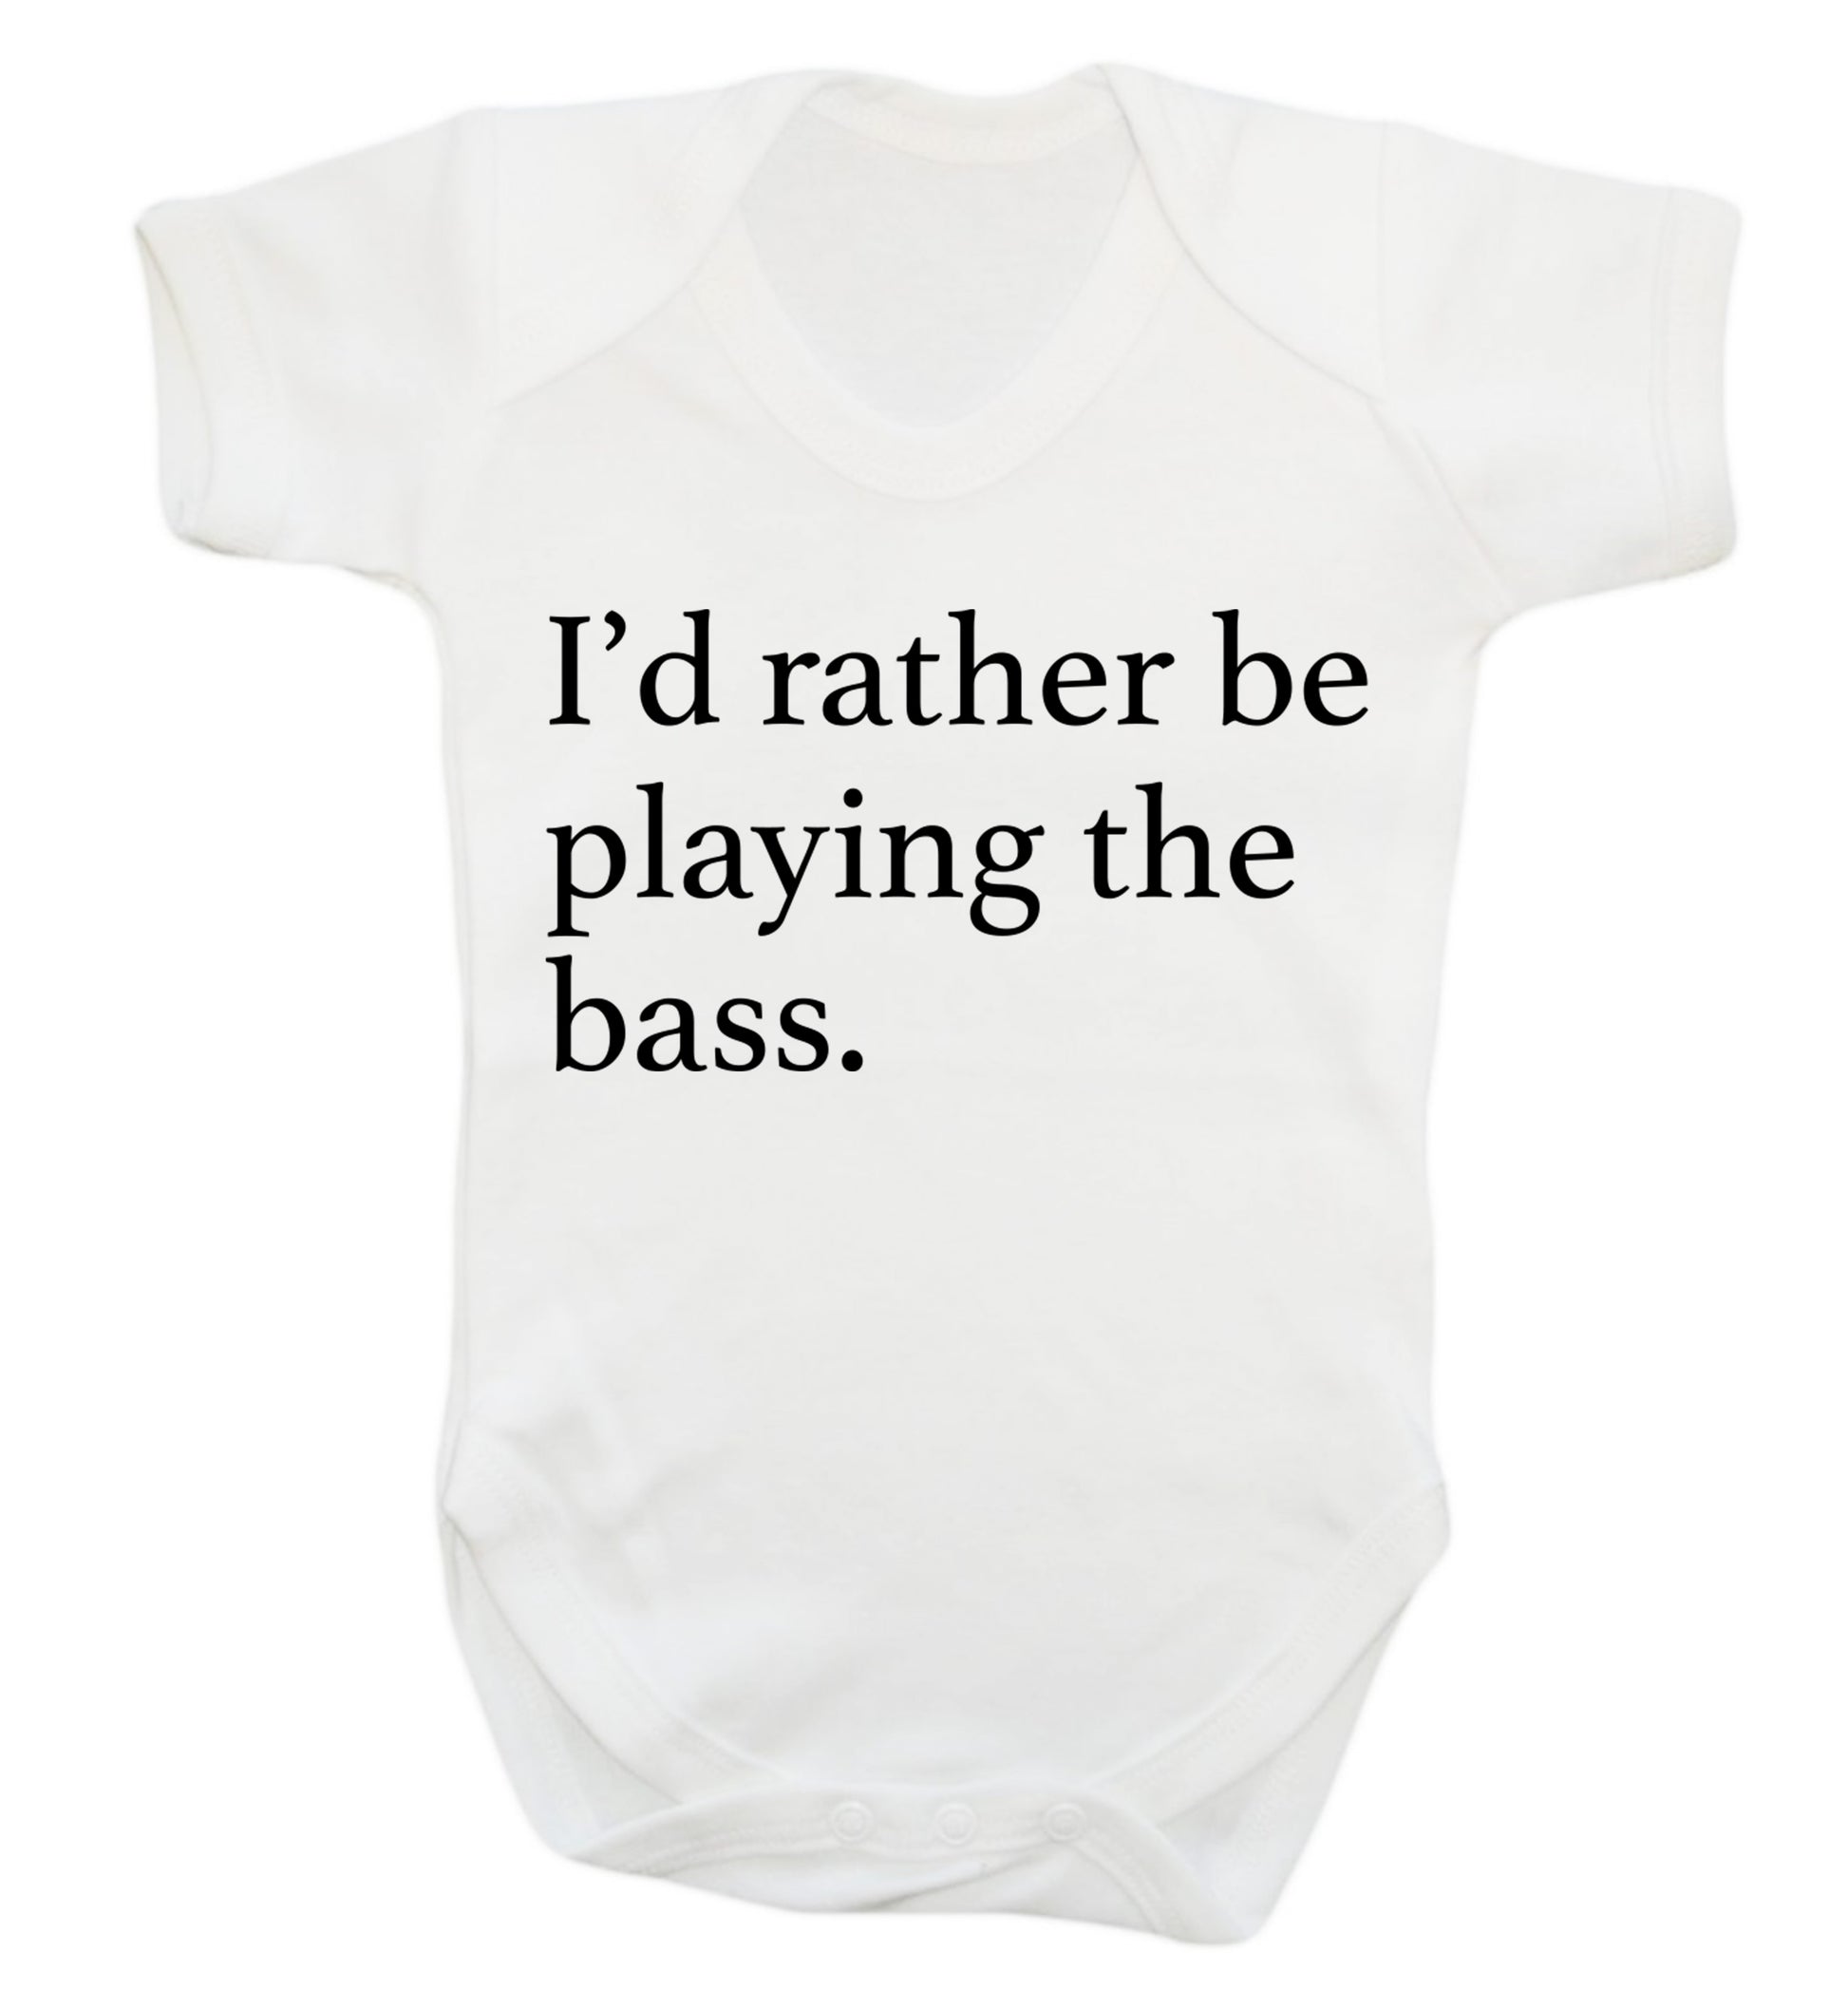 I'd rather by playing the bass Baby Vest white 18-24 months